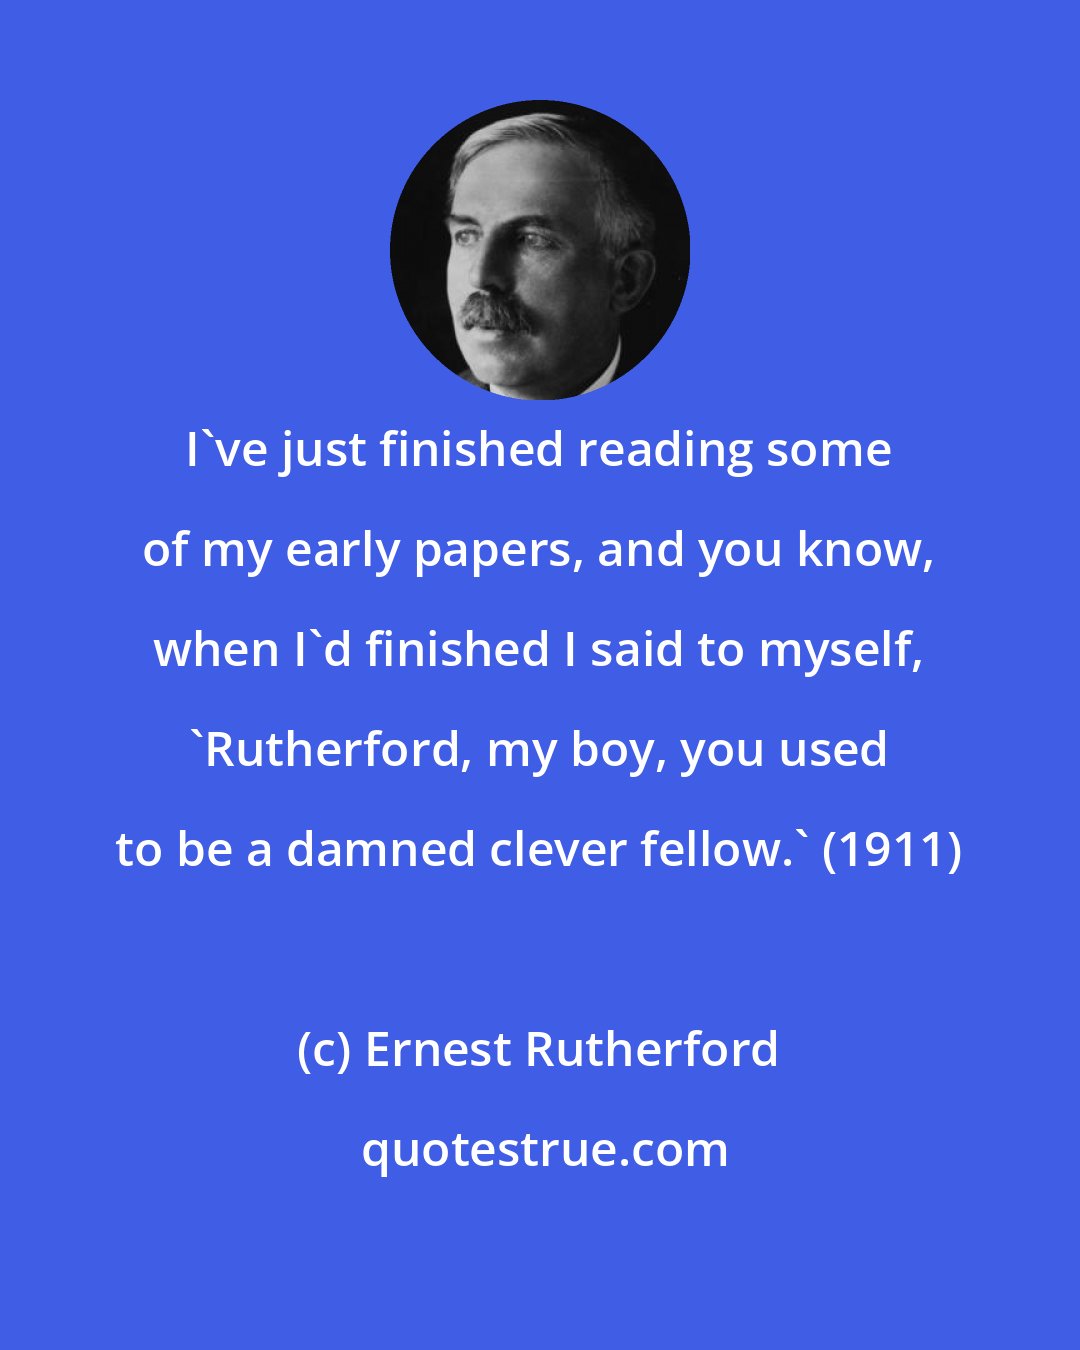 Ernest Rutherford: I've just finished reading some of my early papers, and you know, when I'd finished I said to myself, 'Rutherford, my boy, you used to be a damned clever fellow.' (1911)